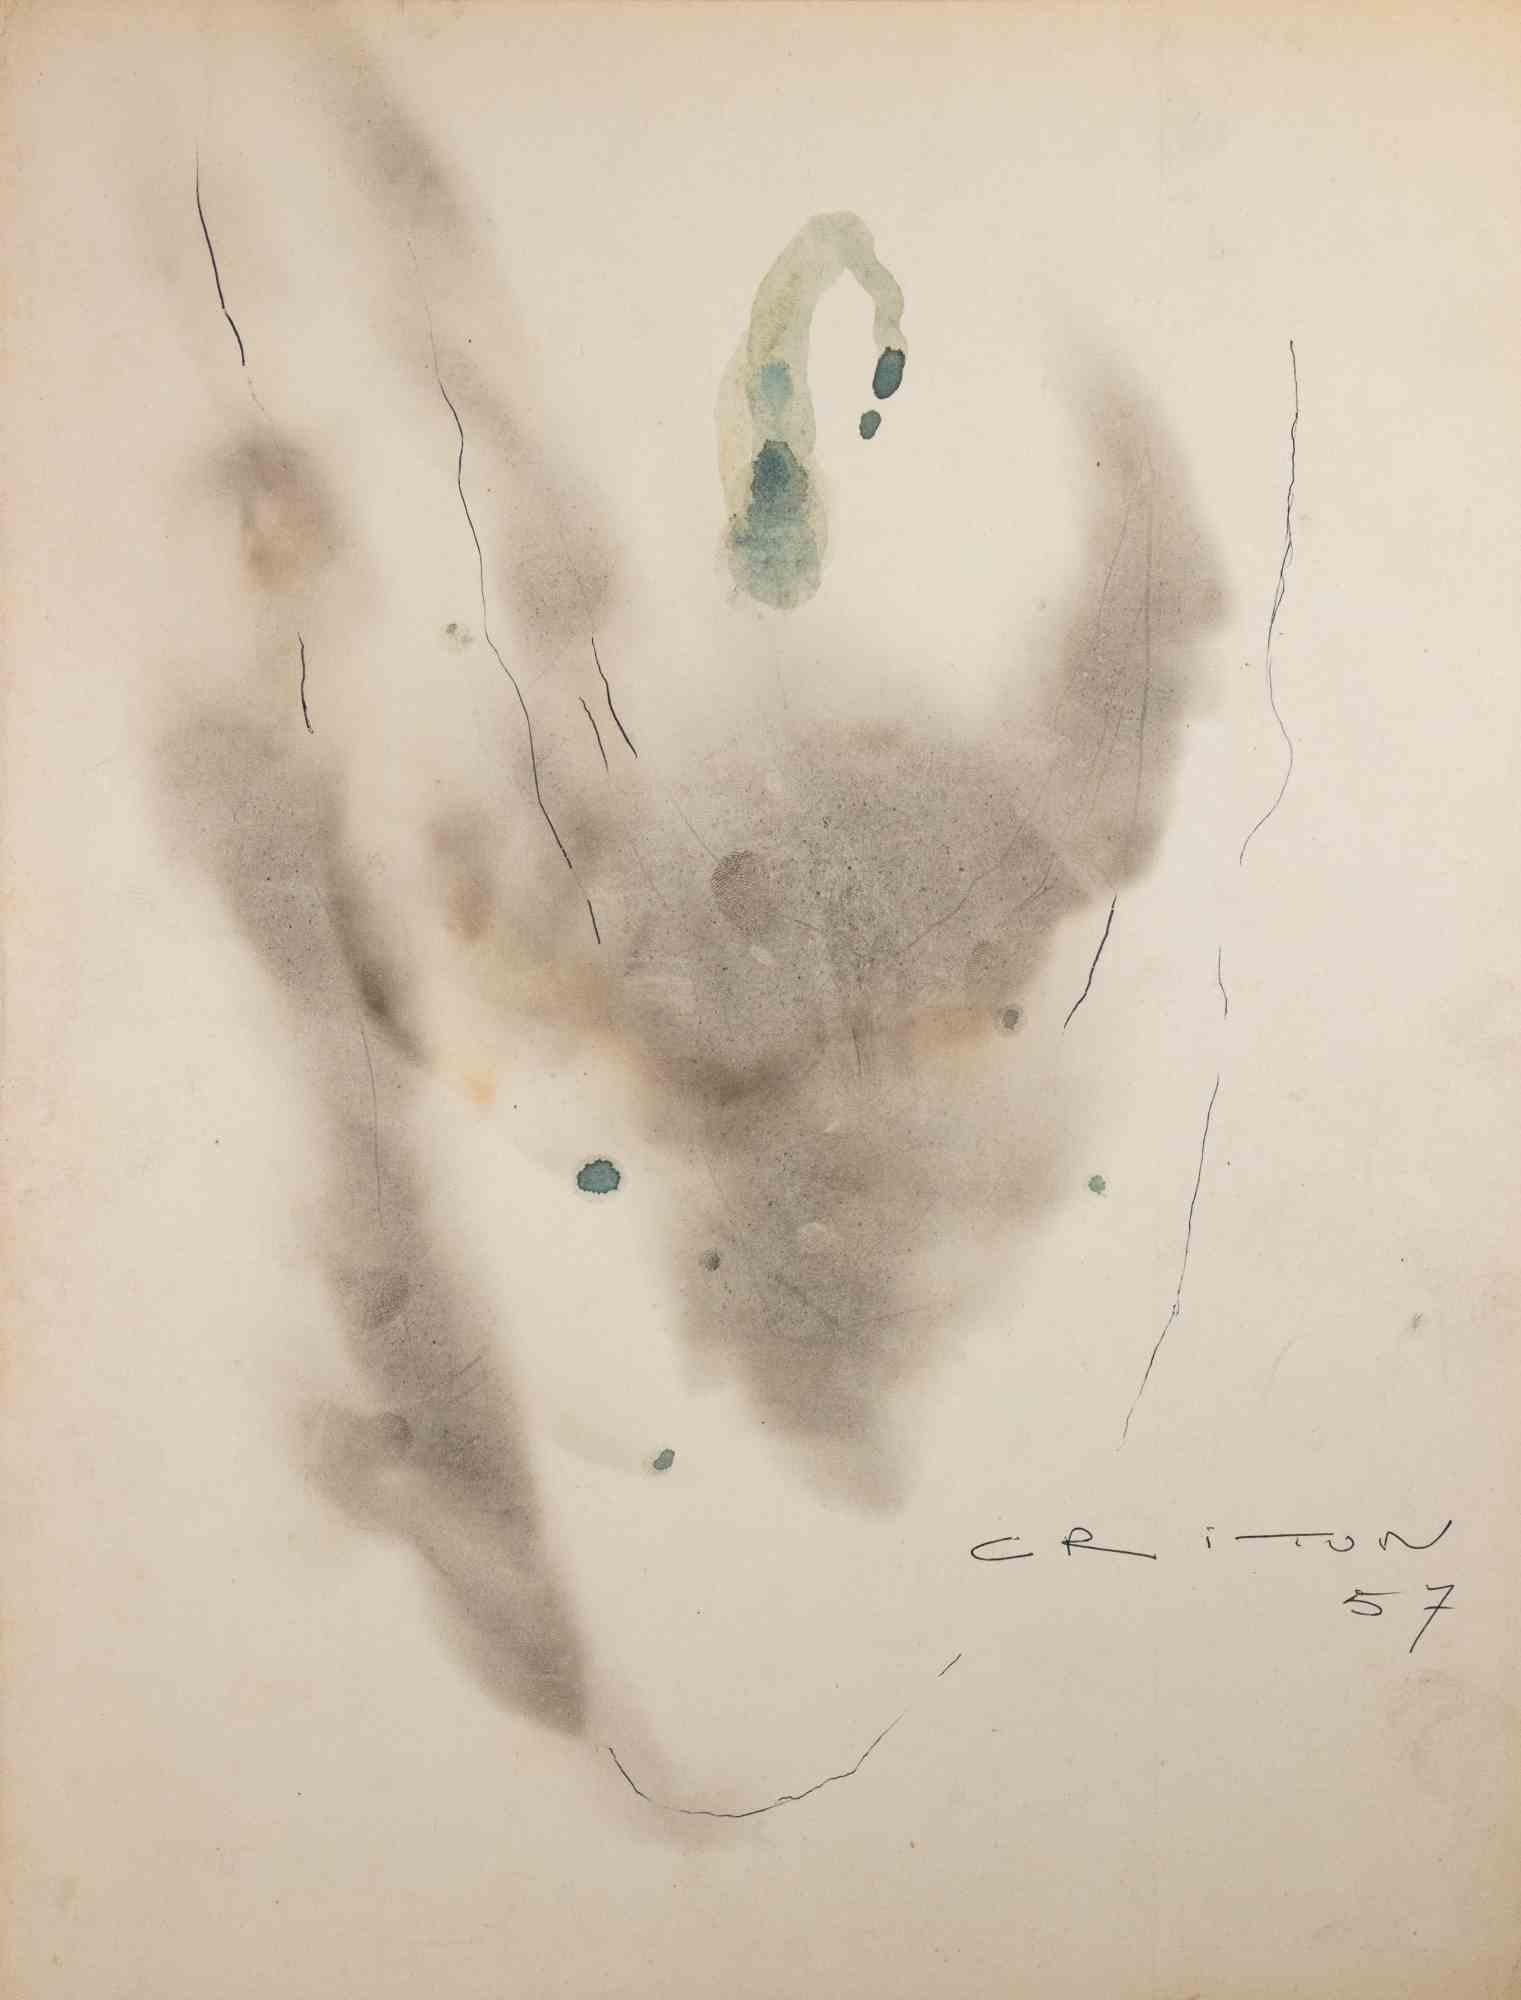 Abstract Composition is a drawing realized by Jean Criton in 1957.

Watercolor, ink on paper. 

Hand-signed and dated.

Good conditions.

The artwork is realized poetically through beautiful strokes